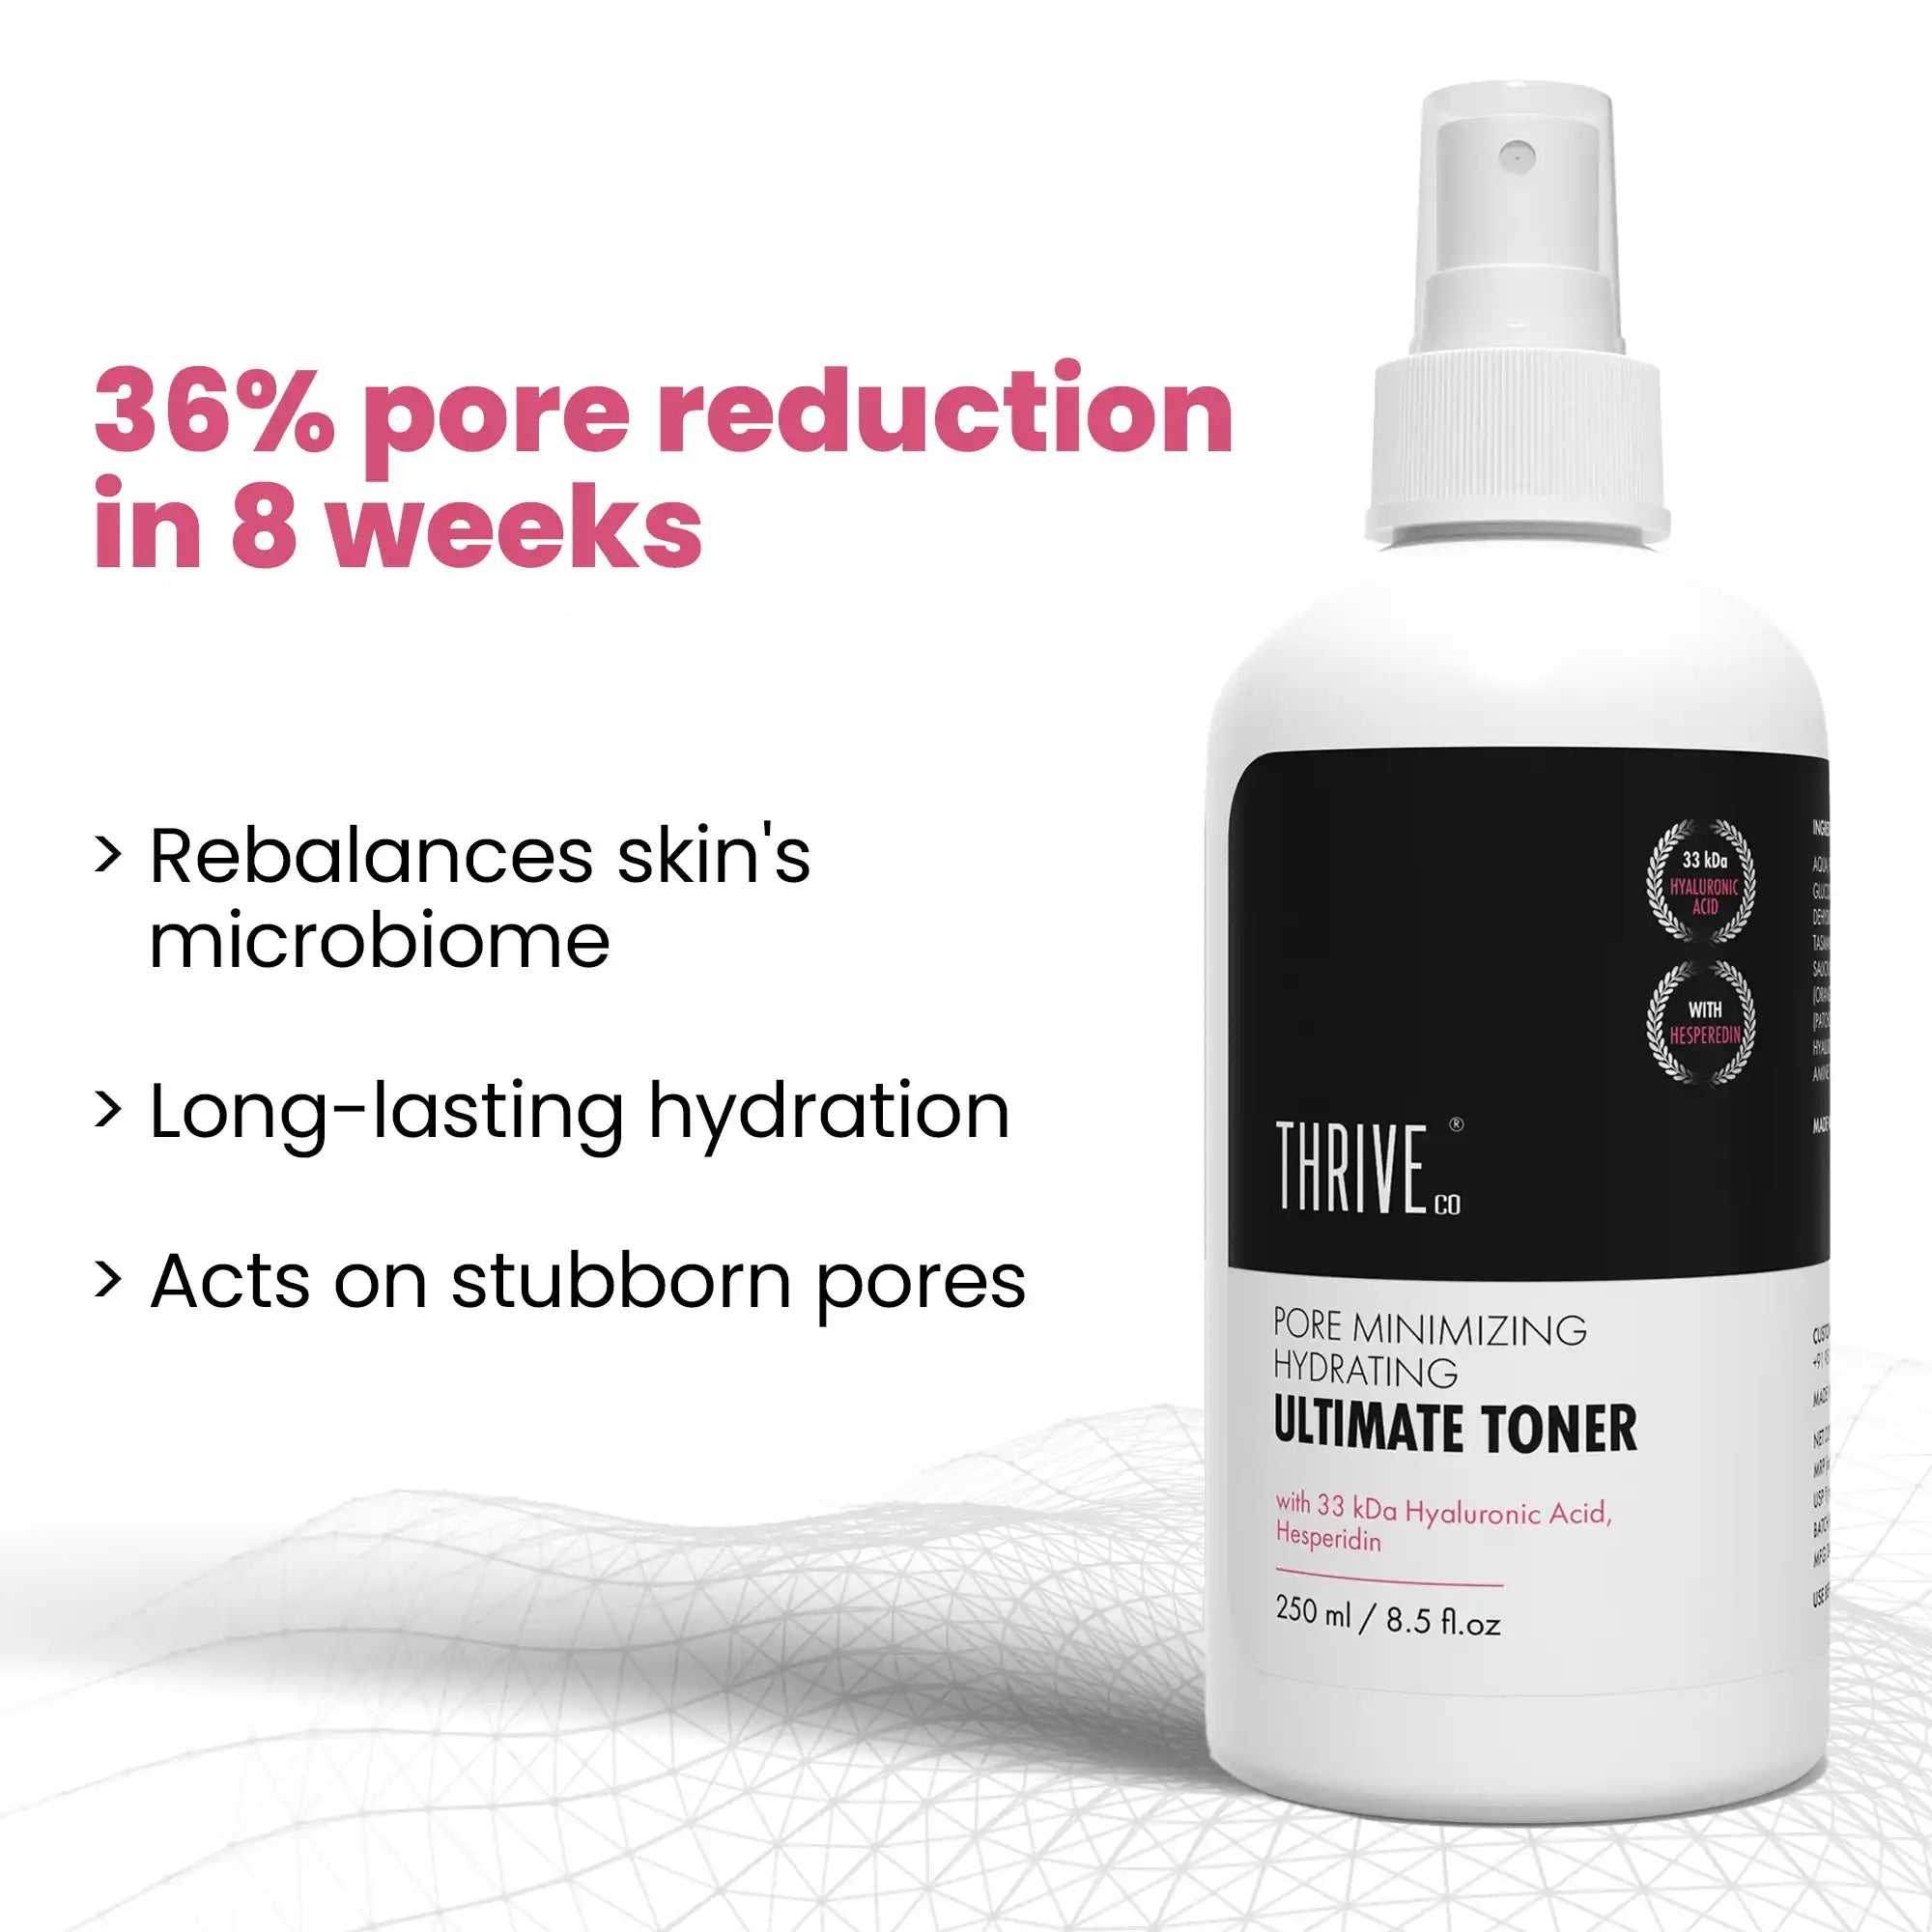 thriveco pore tightening toner reduces open pores in 8 weeks